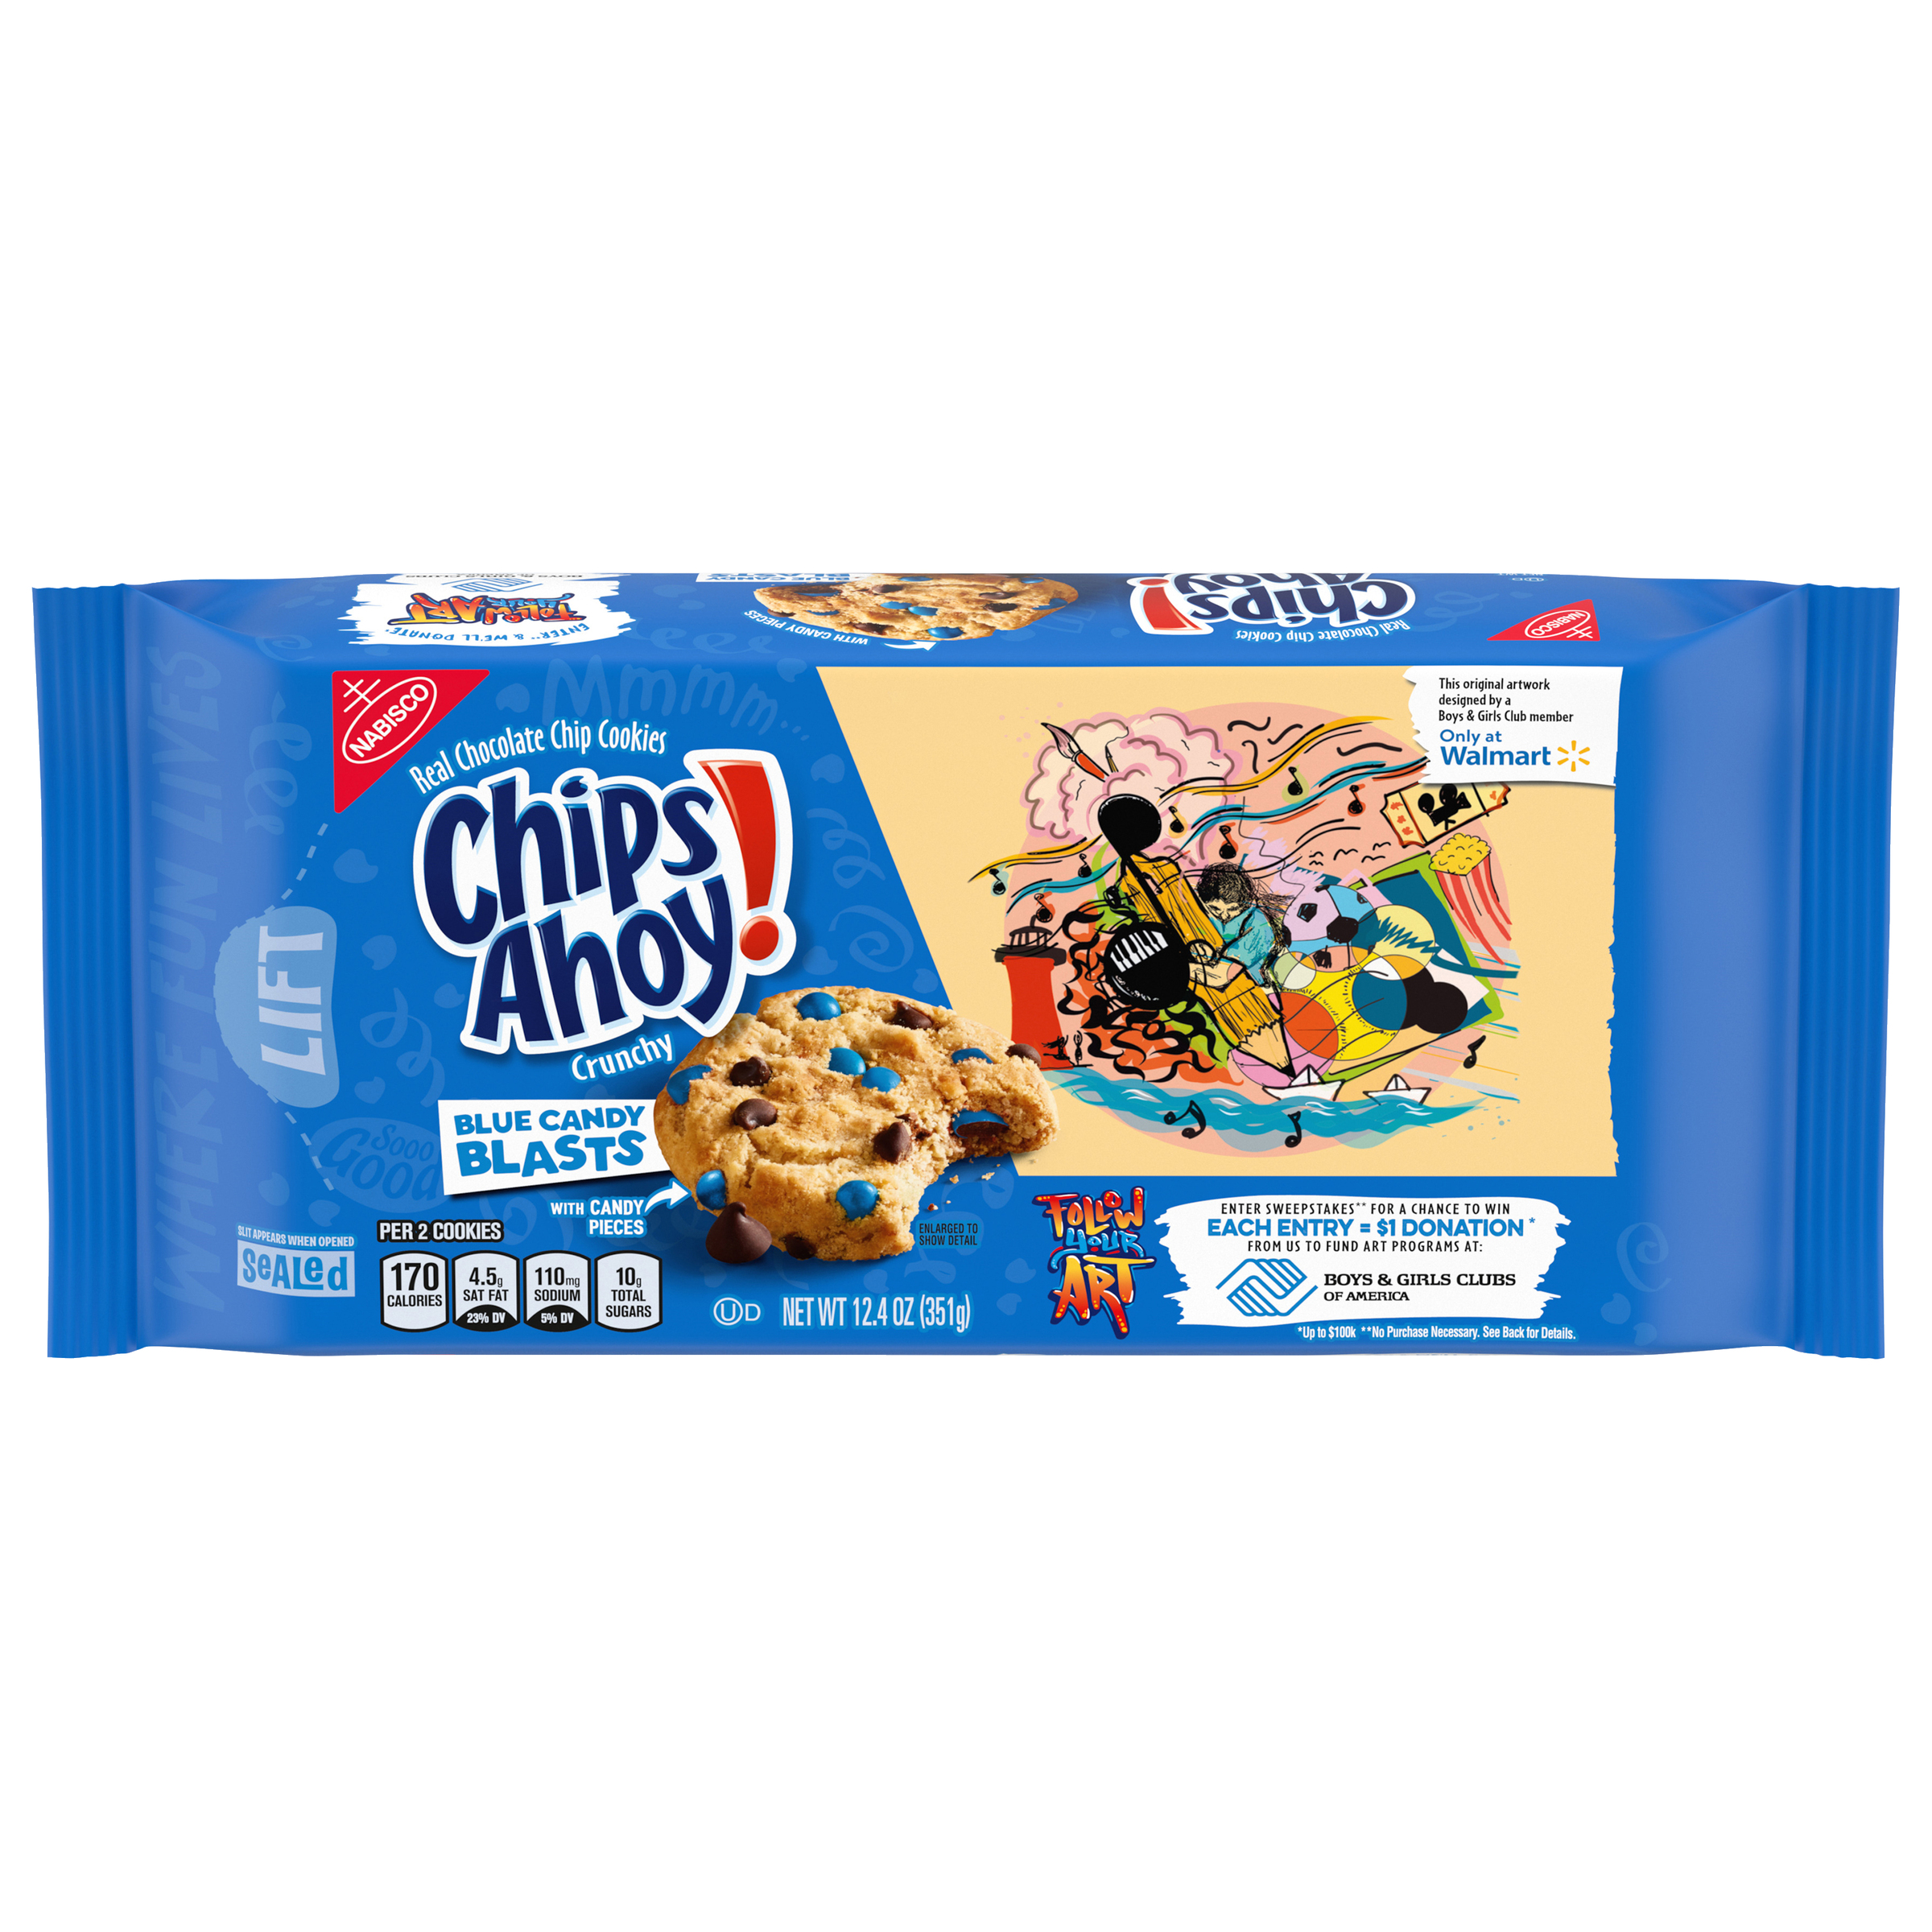 CHIPS AHOY! Chocolate Chip Cookies 0.78 LB